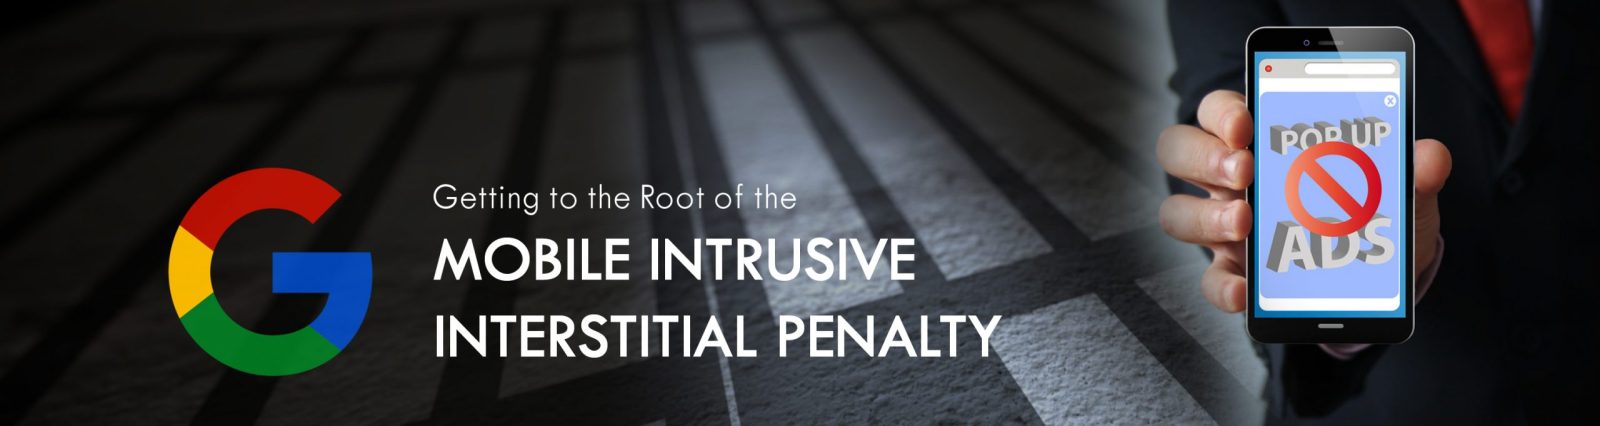 Getting to the Root of the Intrusive Interstitial Penalty